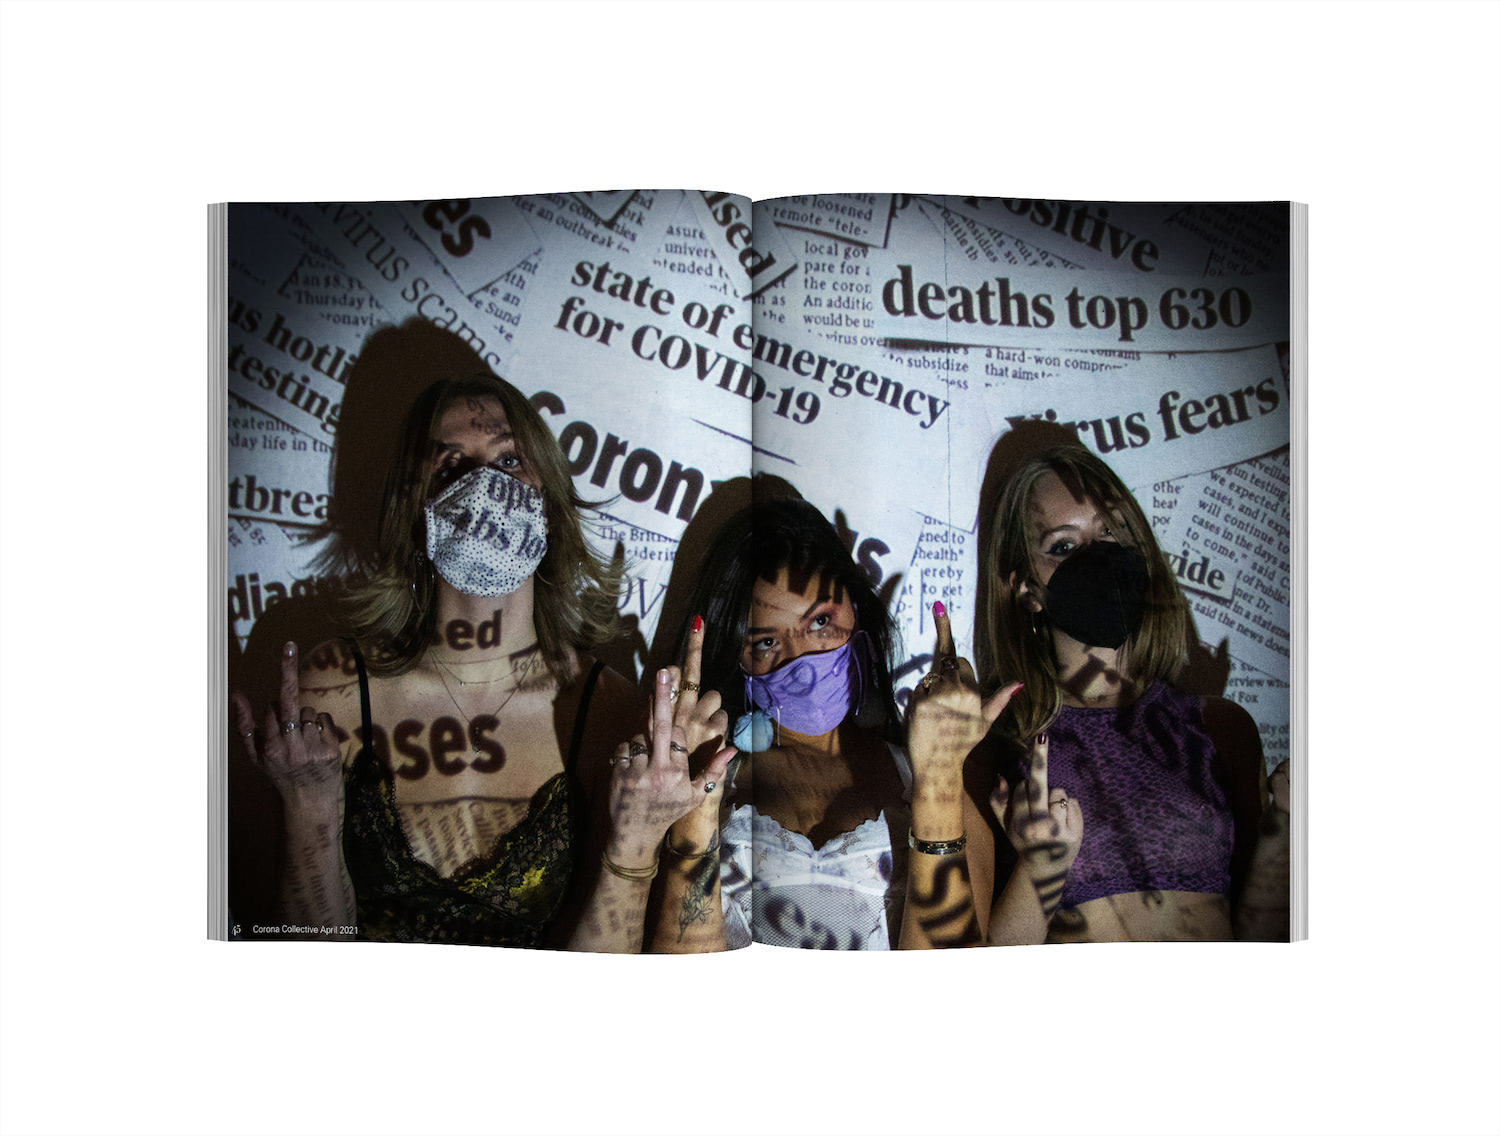 3 Girls wearing face masks and flipping off the camera. There is a projection of famous newspaper headlines over them as they stare into the camera. The model farthest left has short blonde hair with a paler complexion wearing a white polka-dotted face mask and an olive and black lace bralette, the model in the middle is shorter than both the other two and is a tanner skin tone with longer dark brown to black hair and is wearing a purple ruched face mask with a white floral corset top. The model to the farthest right is slightly taller than the girl in the middle and has dark blonde hair and a lighter skin tone and is wearing a black N95 mask with a purple snakeskin mesh shirt.